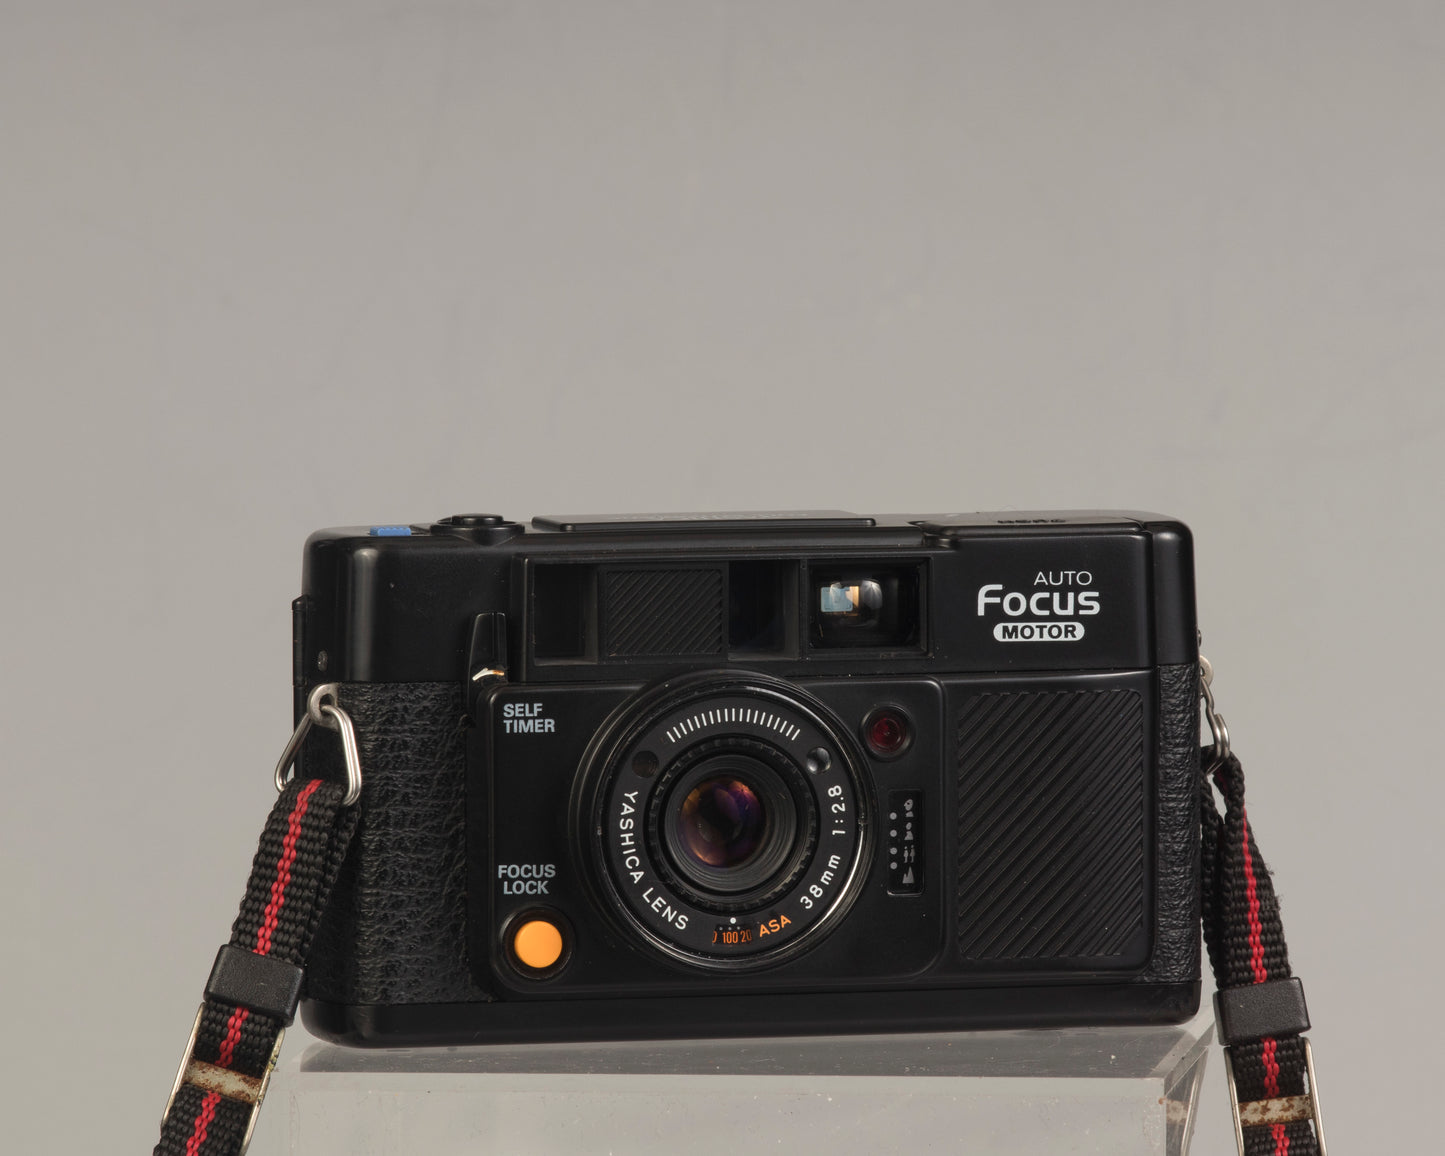 The Yashica Auto Focus Motor is a classic 35mm point-and-shoot film camera featuring a 38mm f2.8 lens